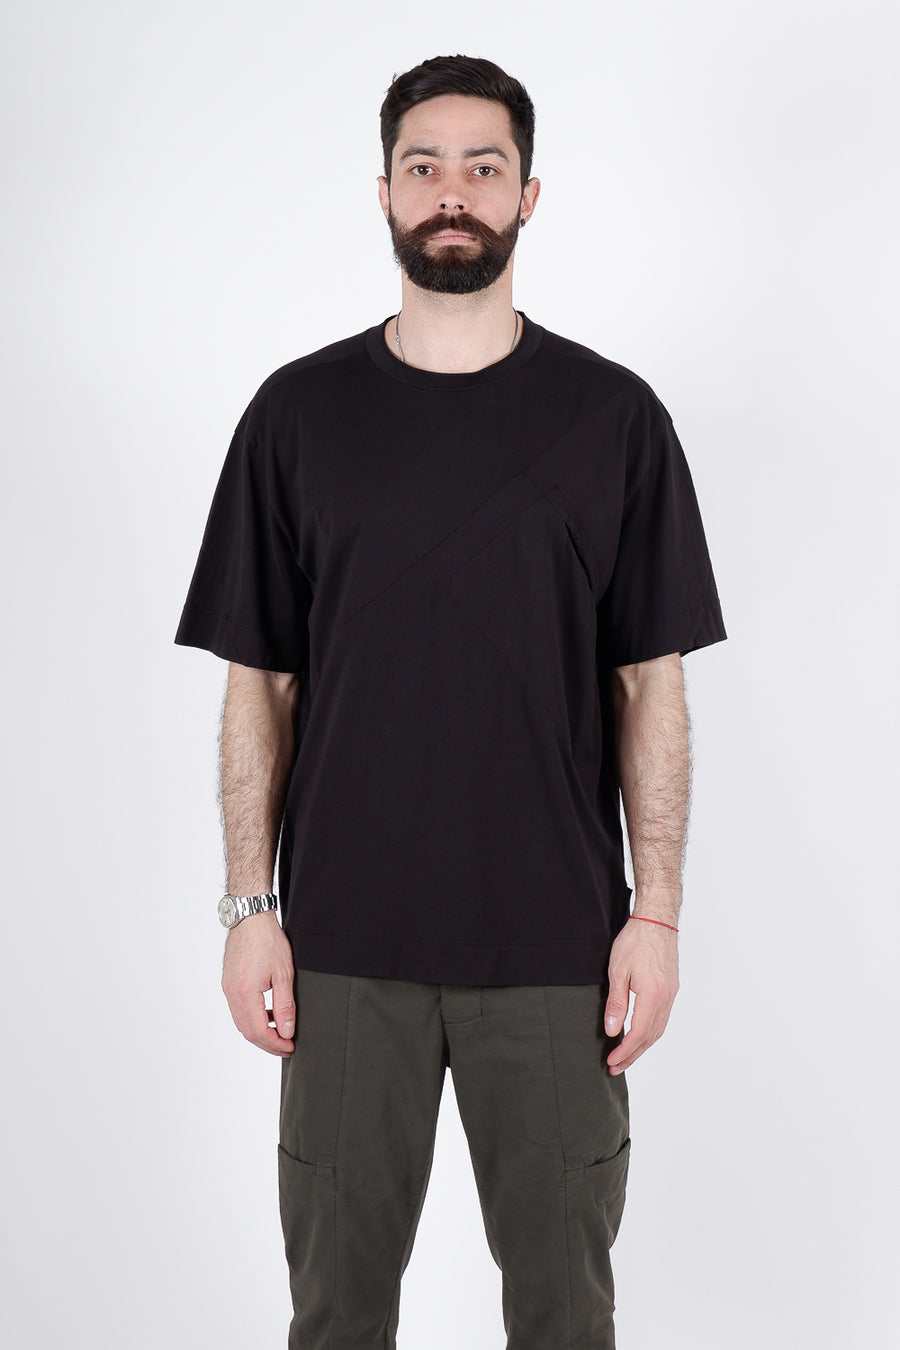 Buy the Transit Front Pocket Detail Oversized T-Shirt in Black at Intro. Spend £50 for free UK delivery. Official stockists. We ship worldwide.